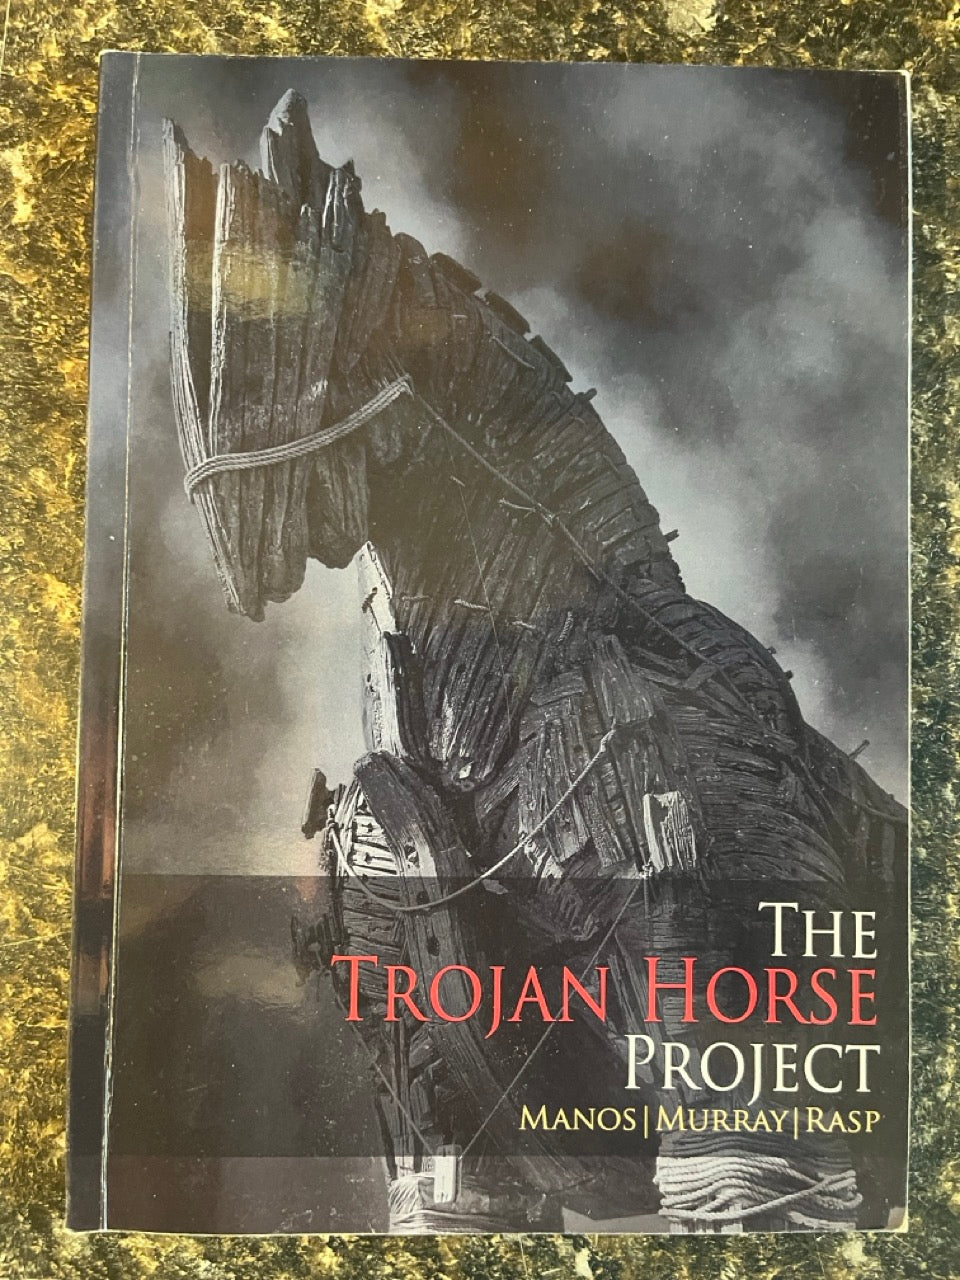 The Trojan Horse Project - Manos/Murray/Rasp (Preowned copy)